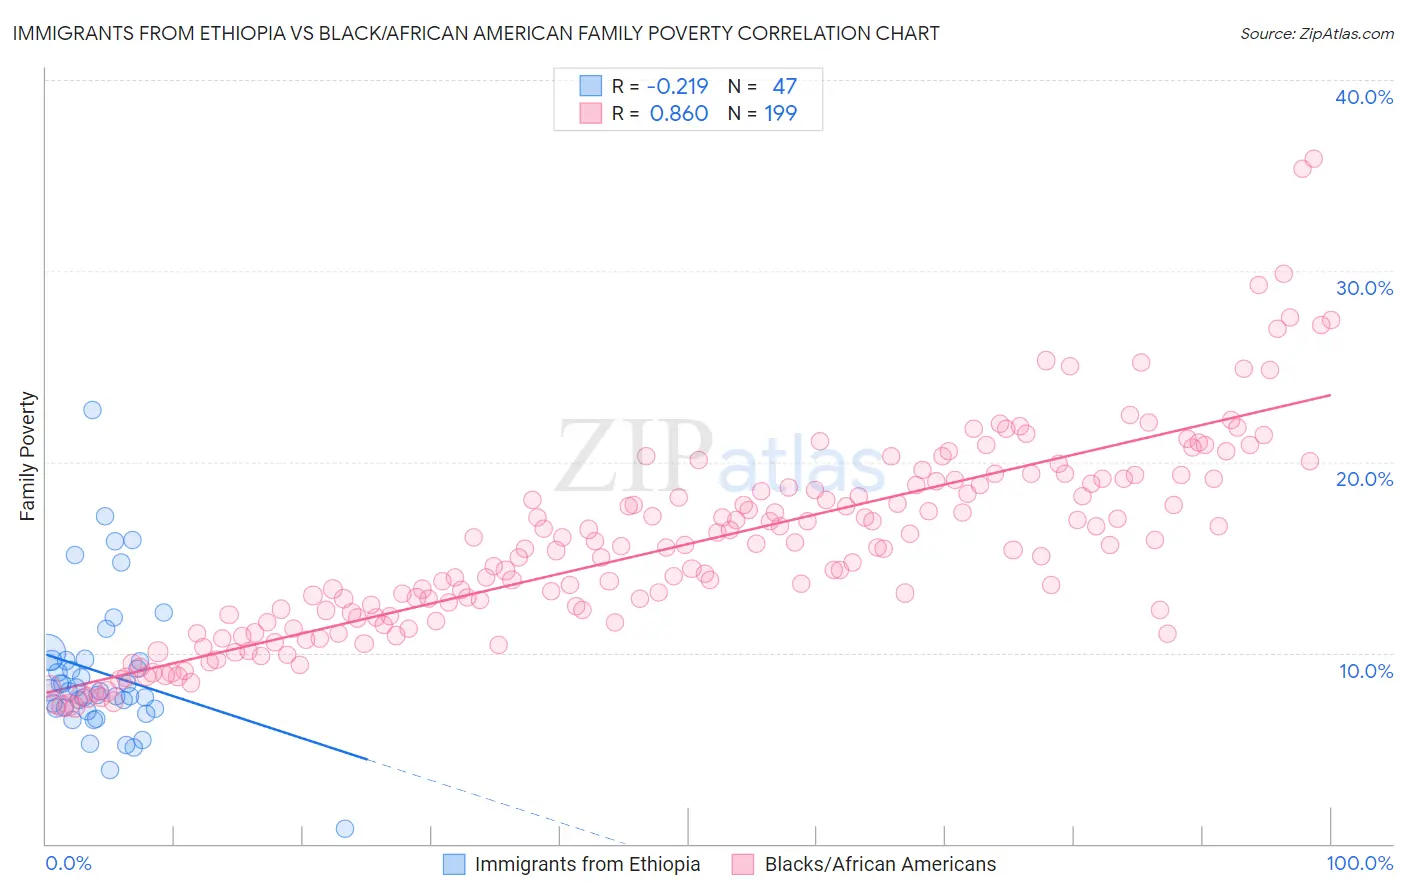 Immigrants from Ethiopia vs Black/African American Family Poverty